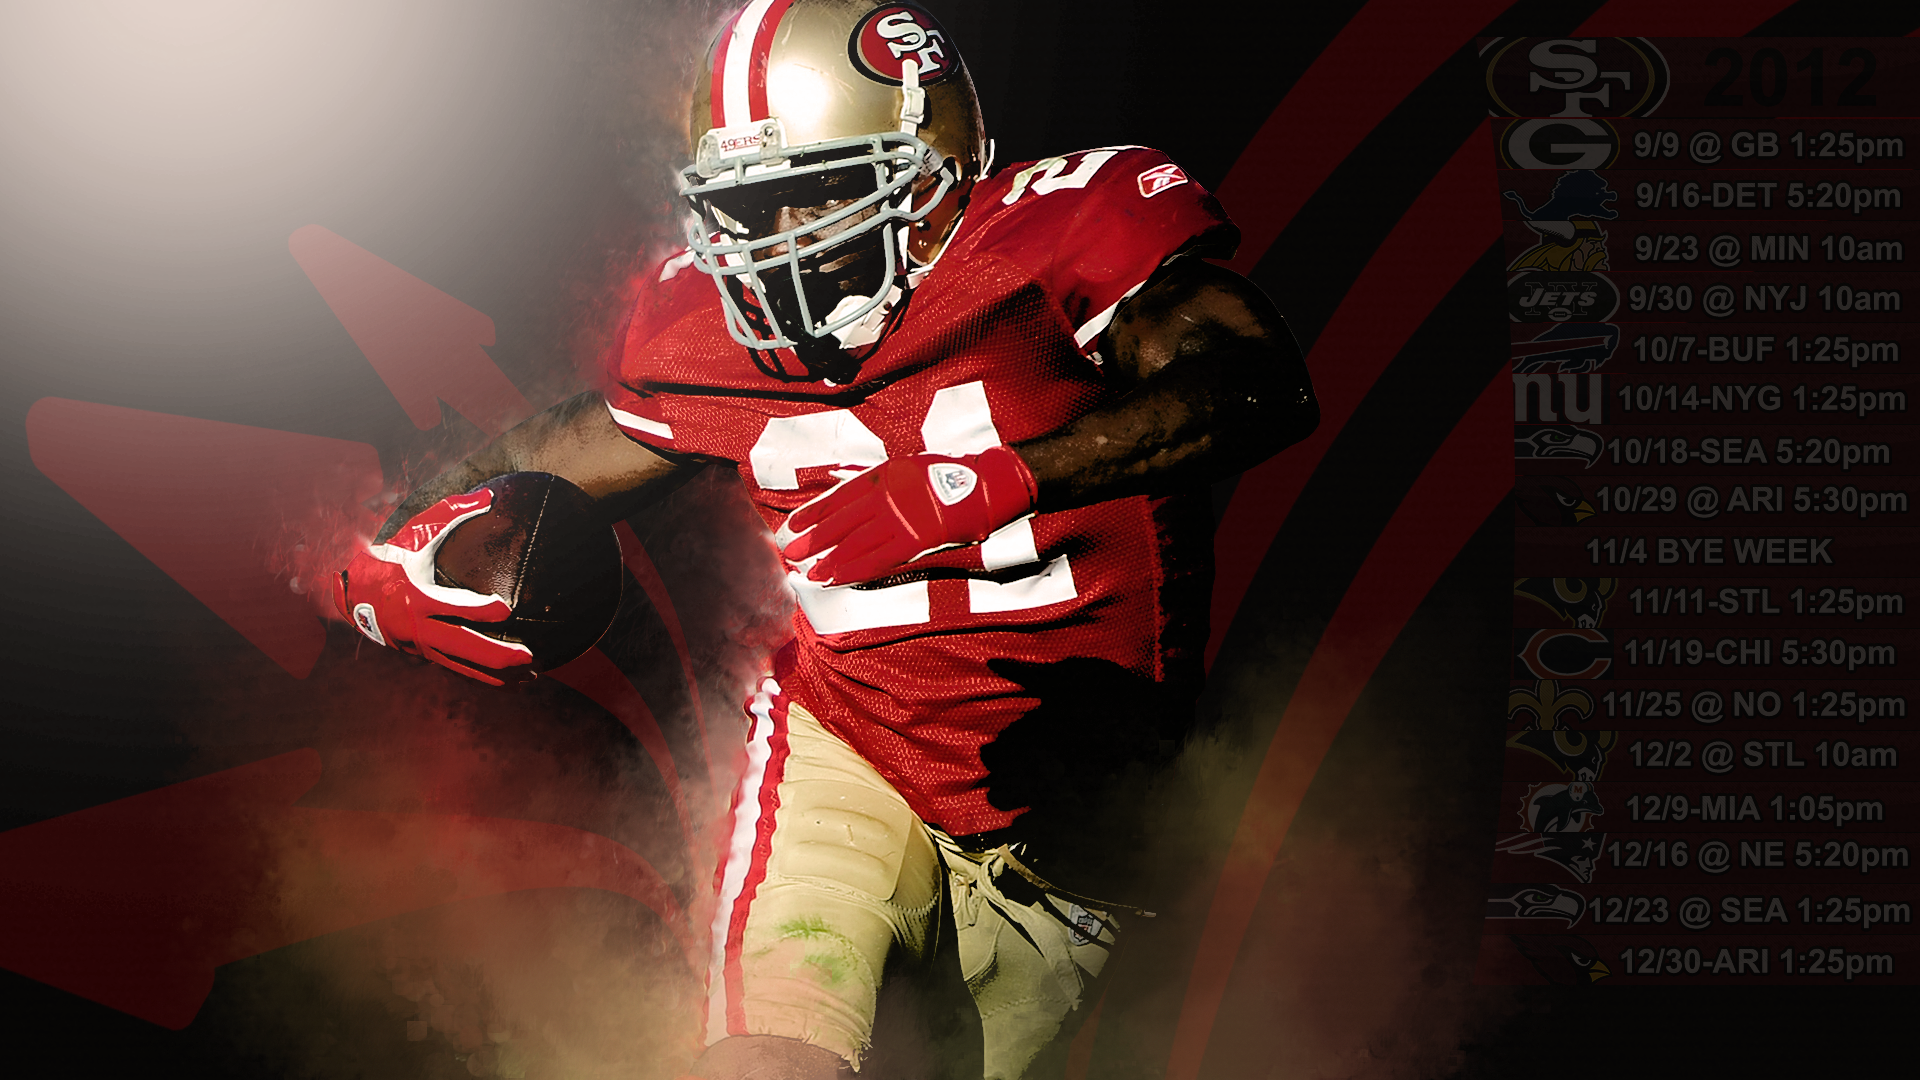 49ers Kaepernick Wallpaper 2012 Images amp Pictures   Becuo